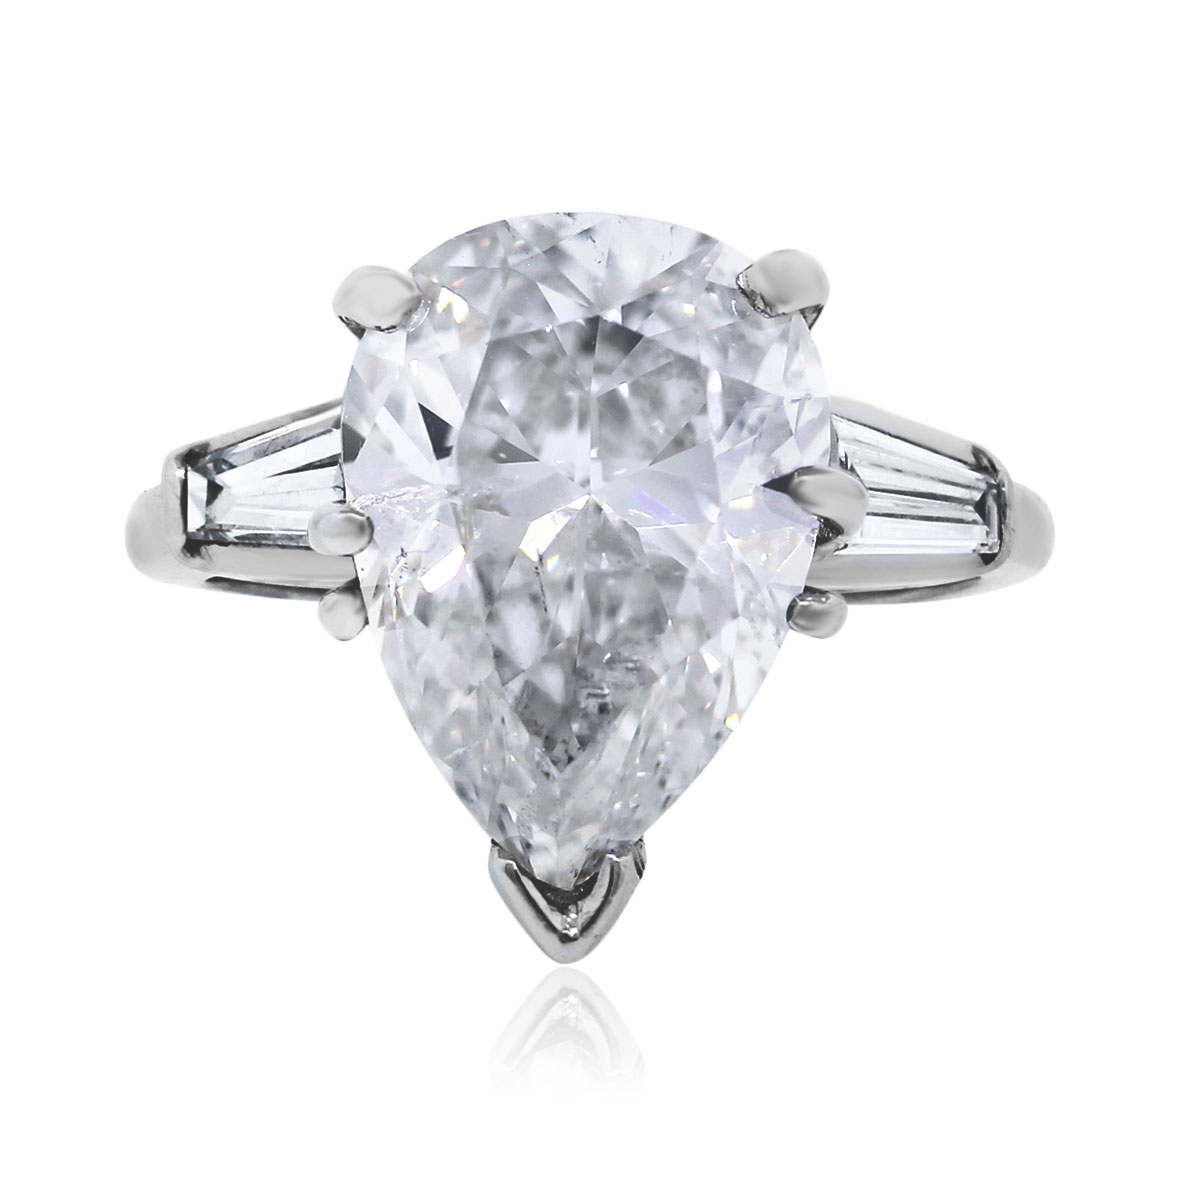 Top 20 Questions About Pear Shaped Engagement Rings – Raymond Lee Jewelers